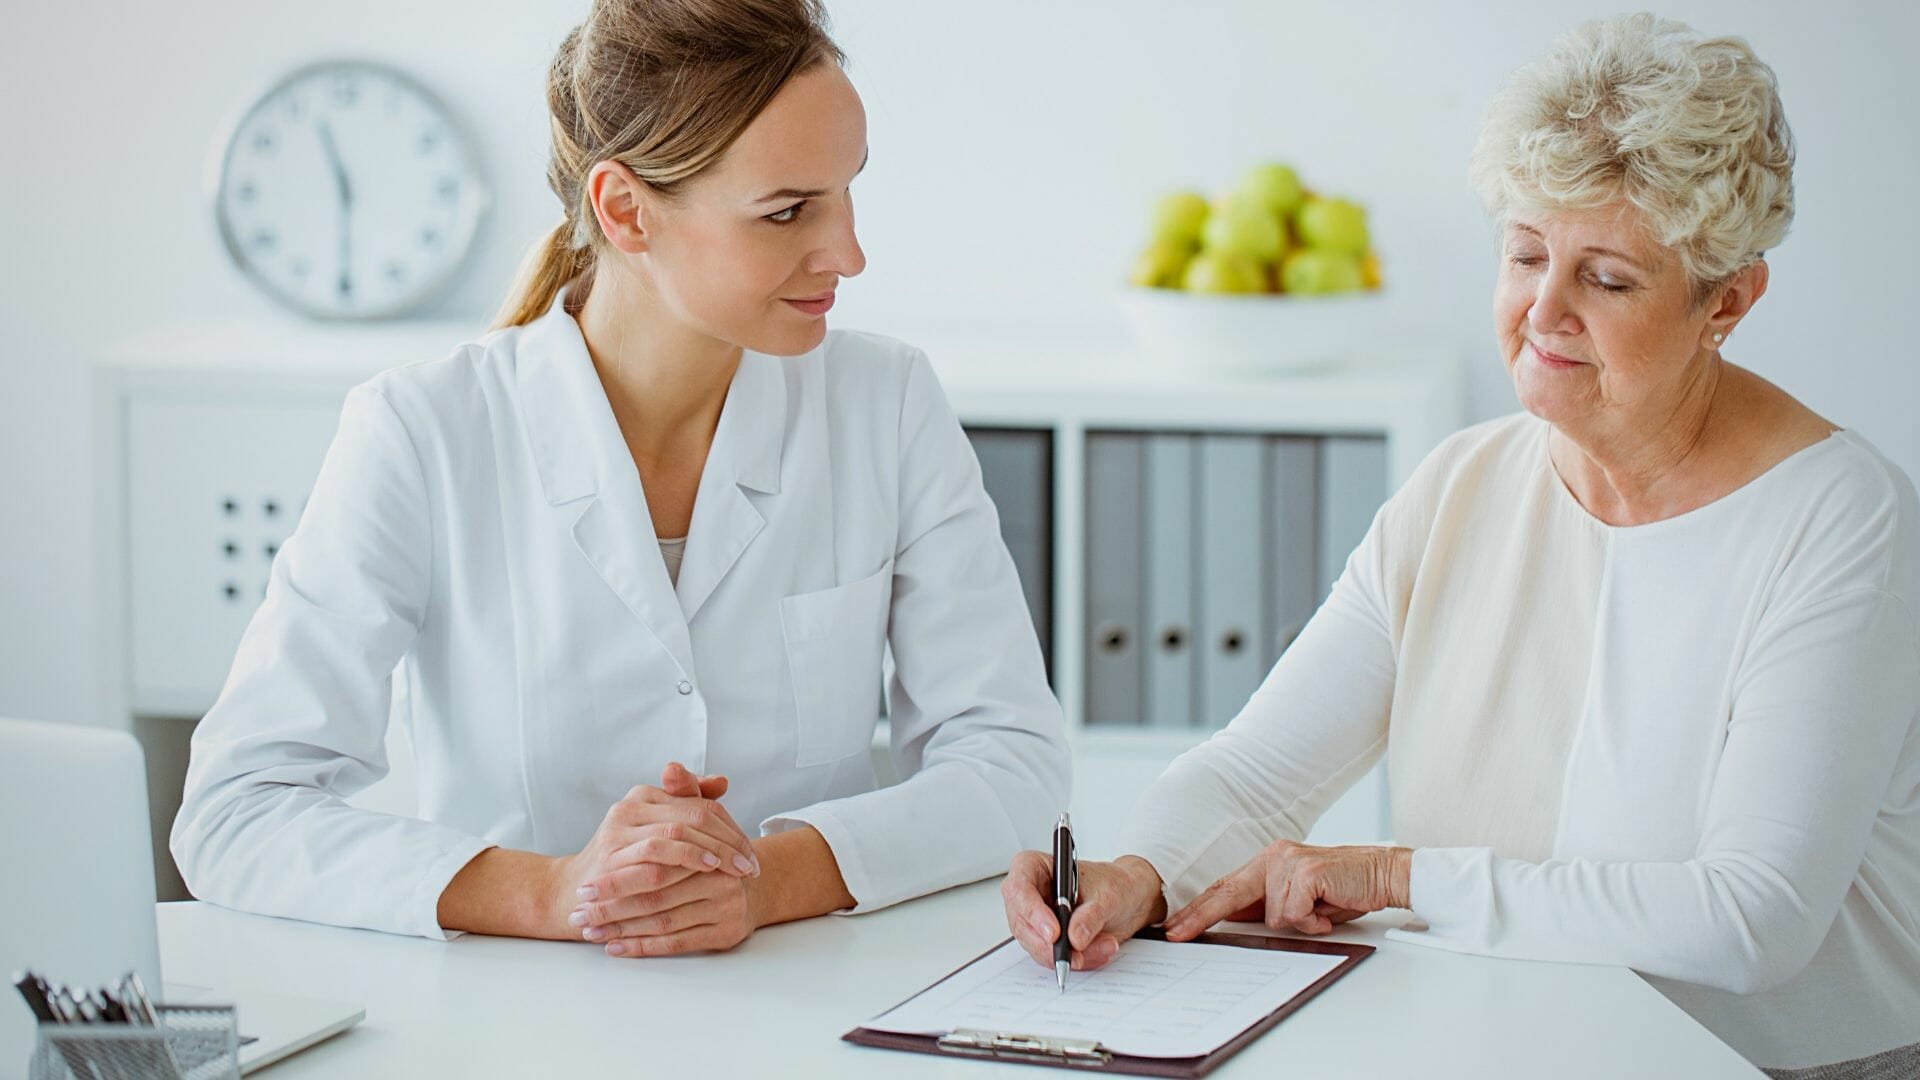 A woman consulting with a medical professional